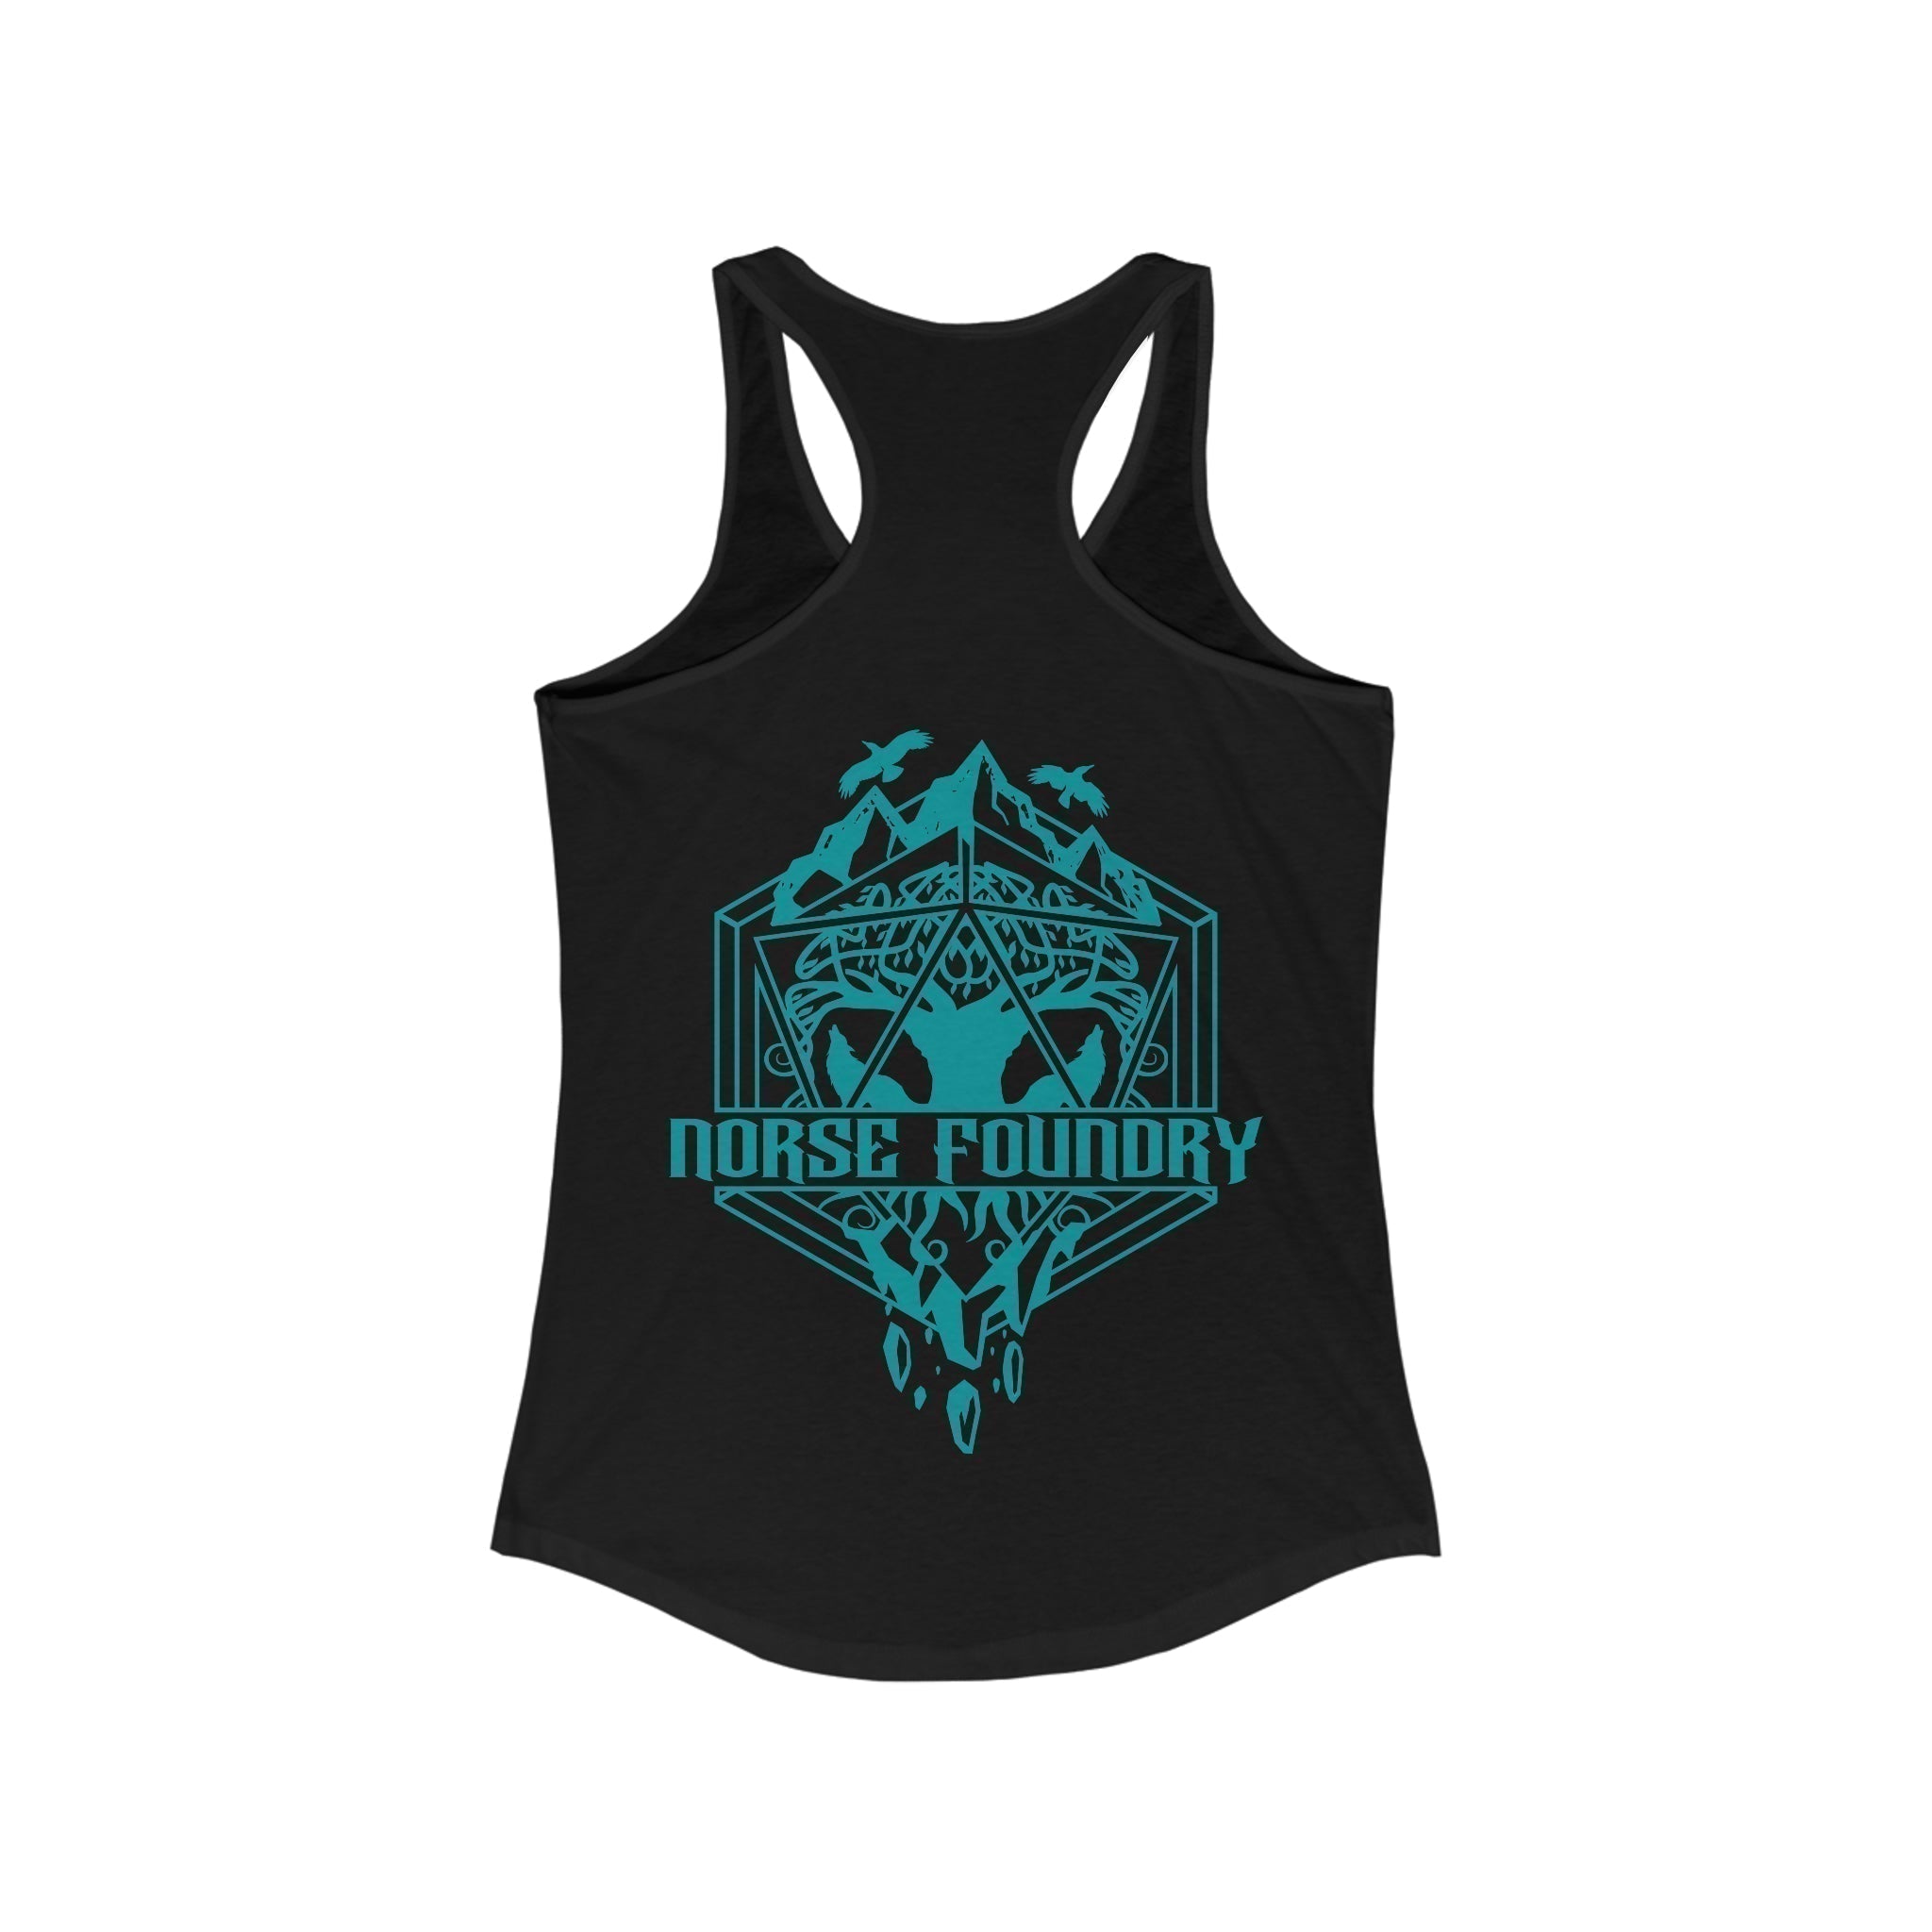 Roll for Adventure - Norse Foundry Women's Tank Top - 19669635553404840206